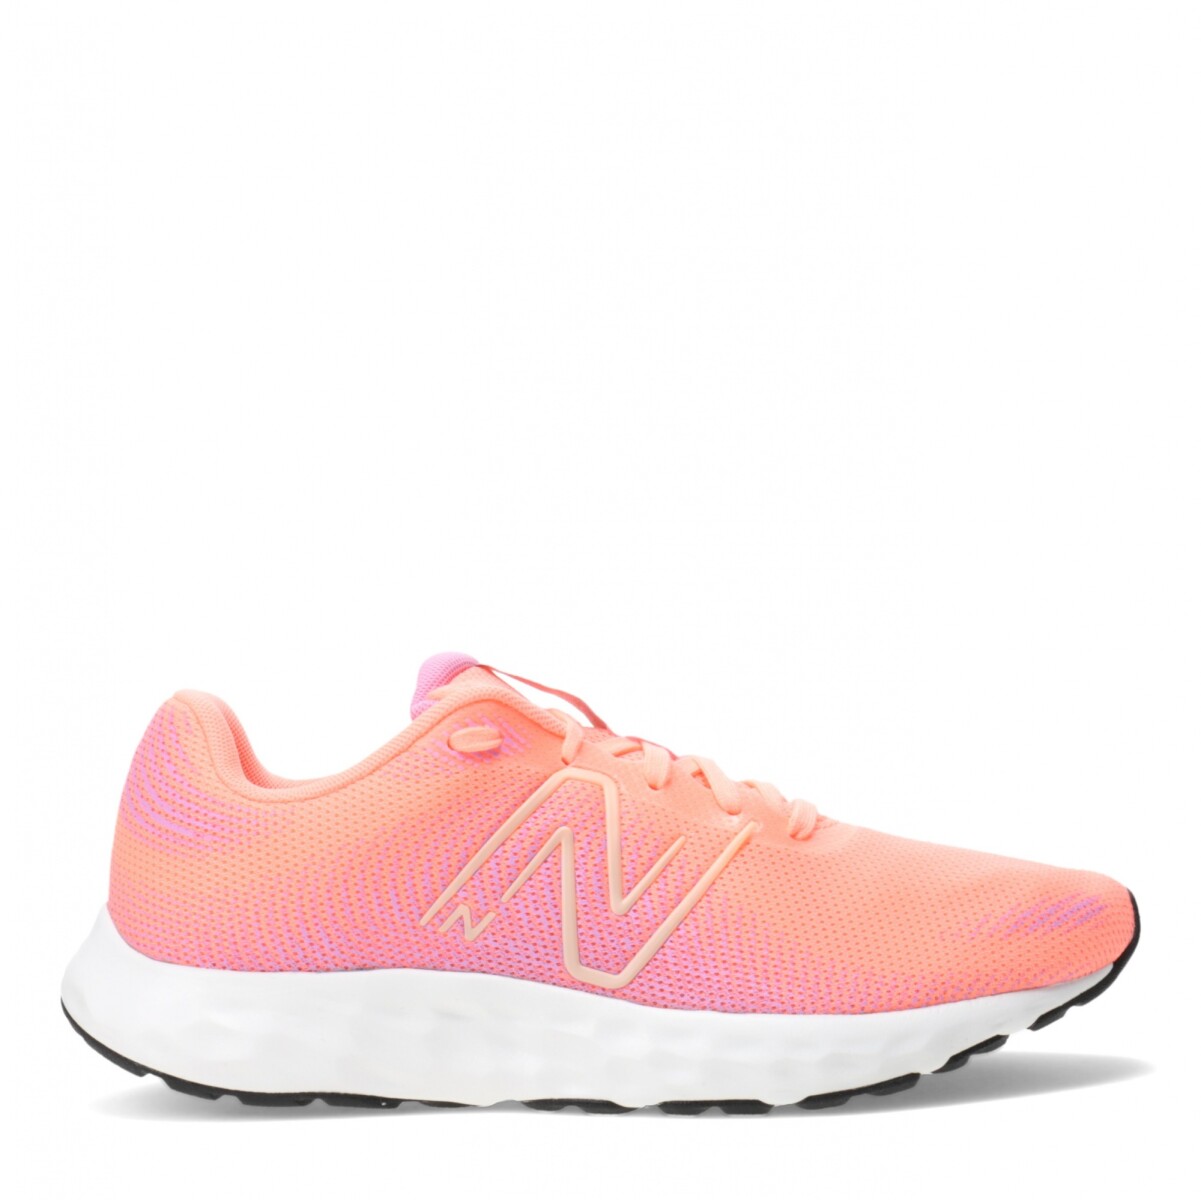 Running Course New Balance - Coral/Lila 